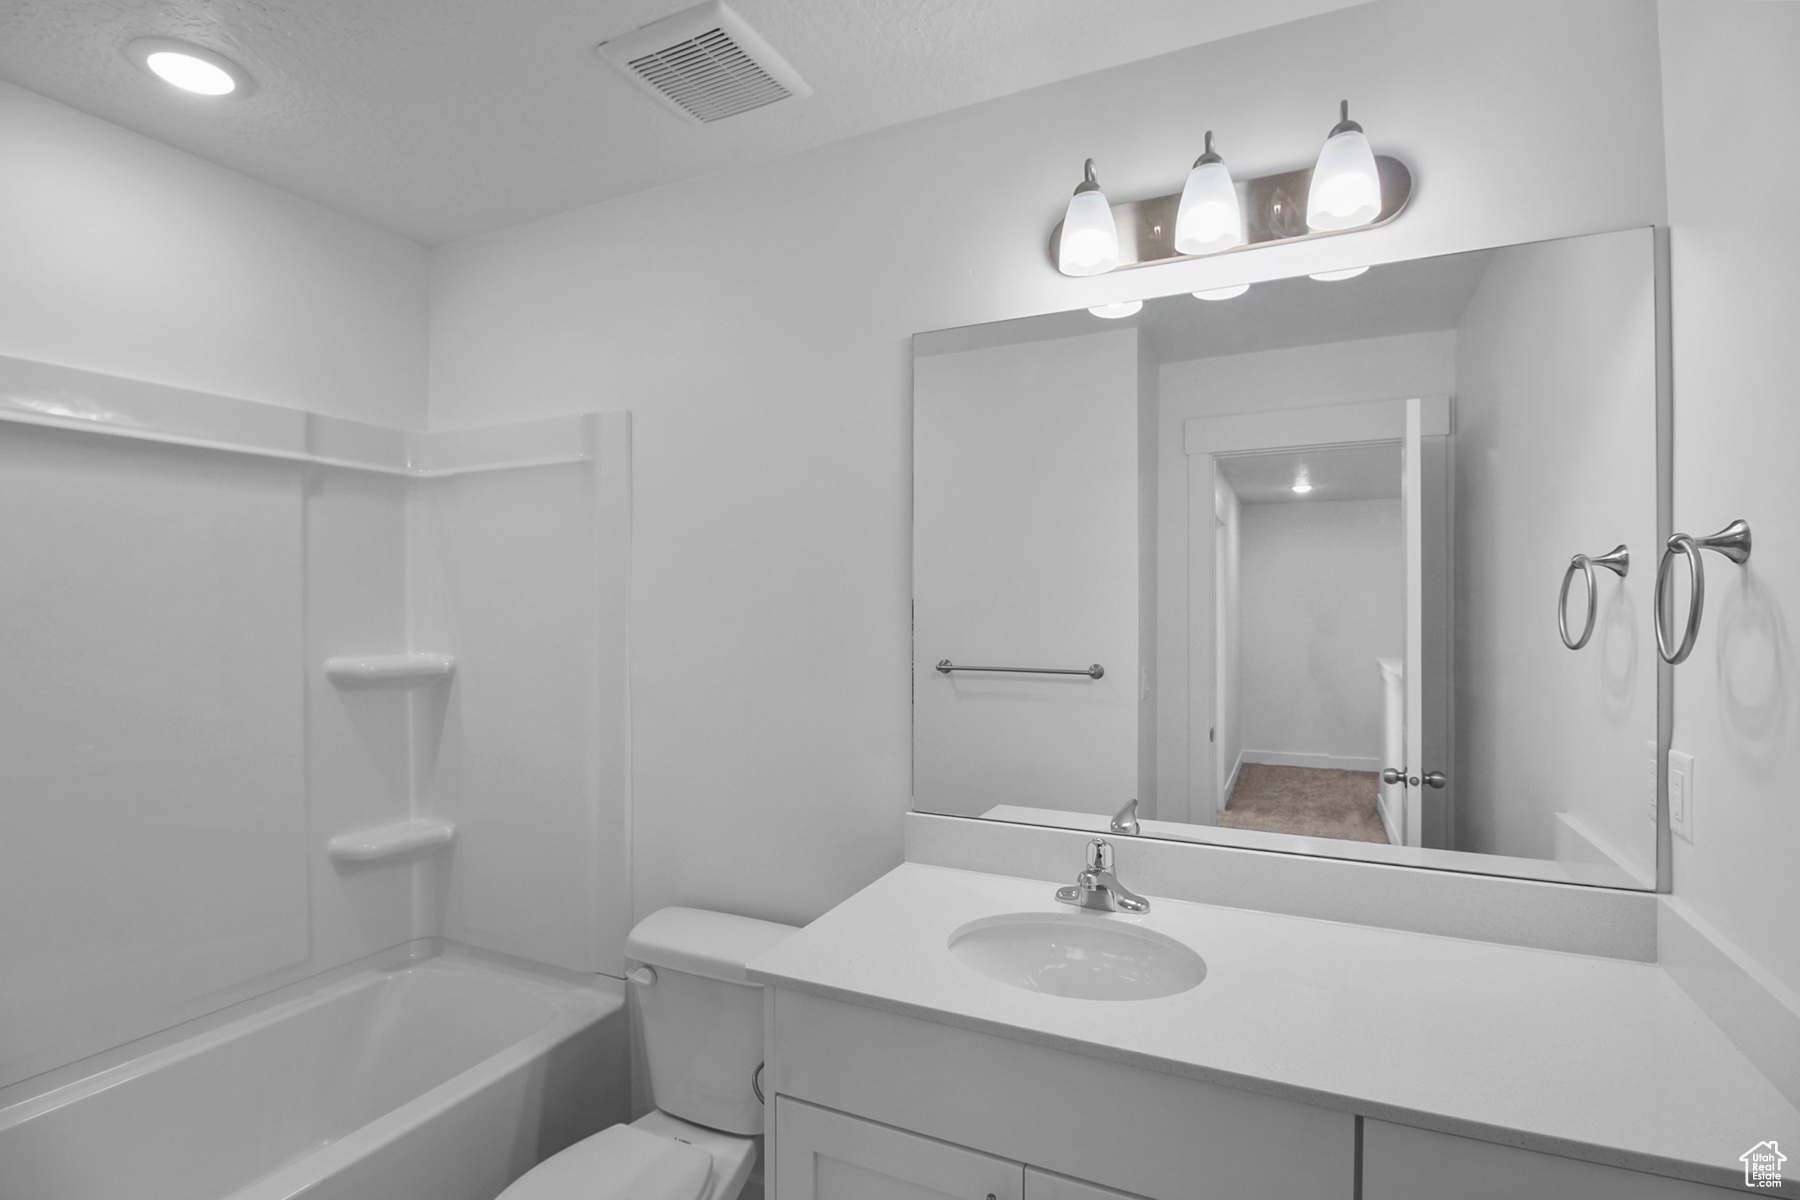 Full bathroom with vanity, toilet, a textured ceiling, and bathing tub / shower combination